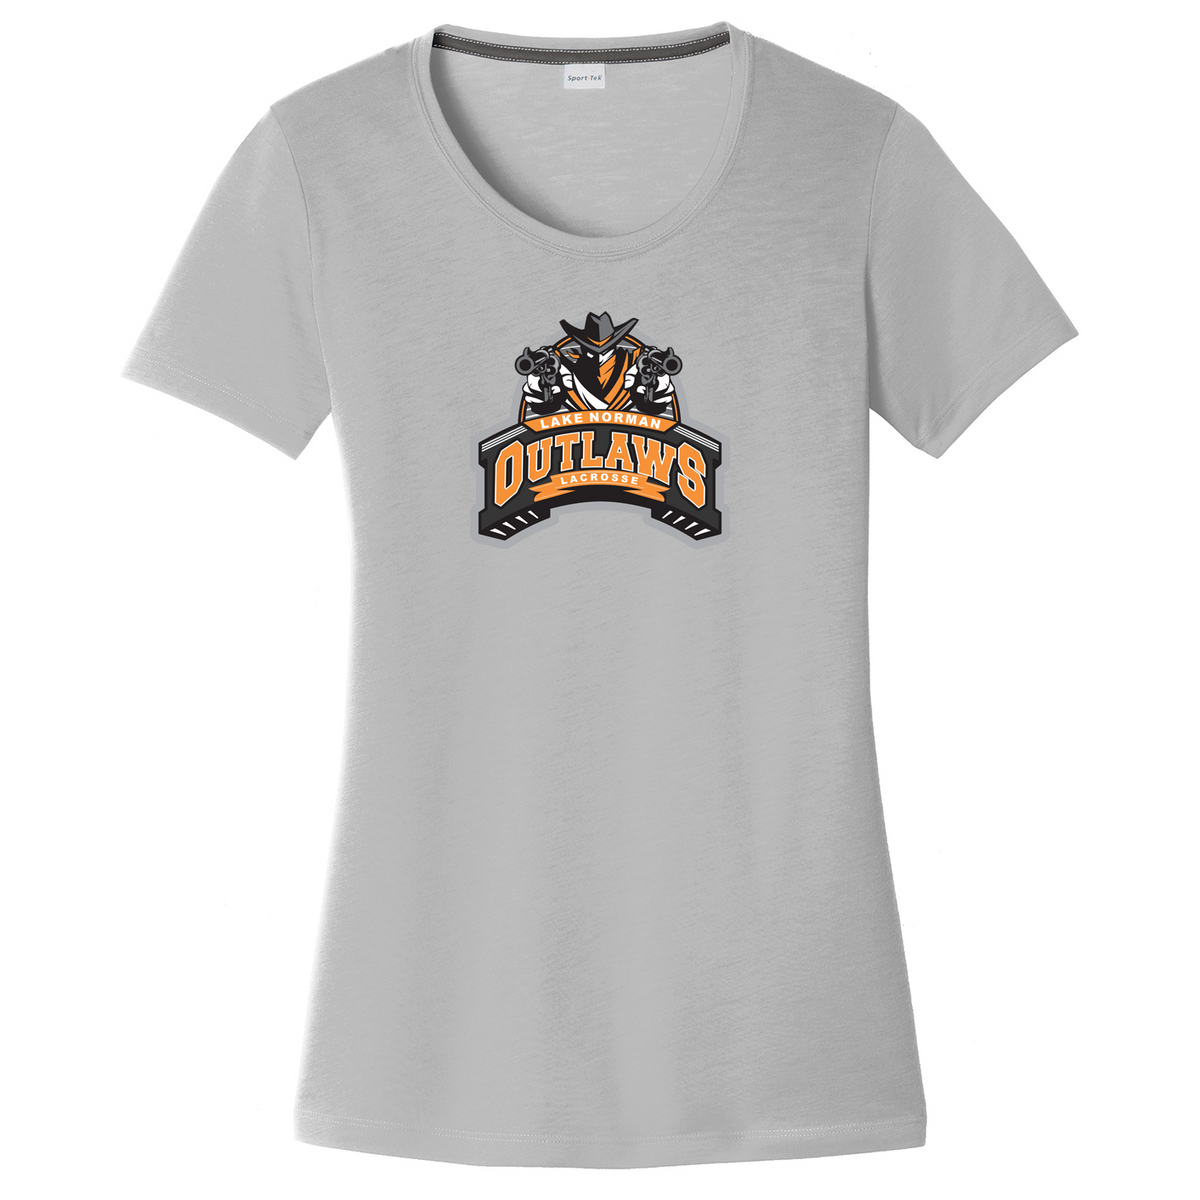 Lake Norman Outlaws Women's CottonTouch Performance T-Shirt